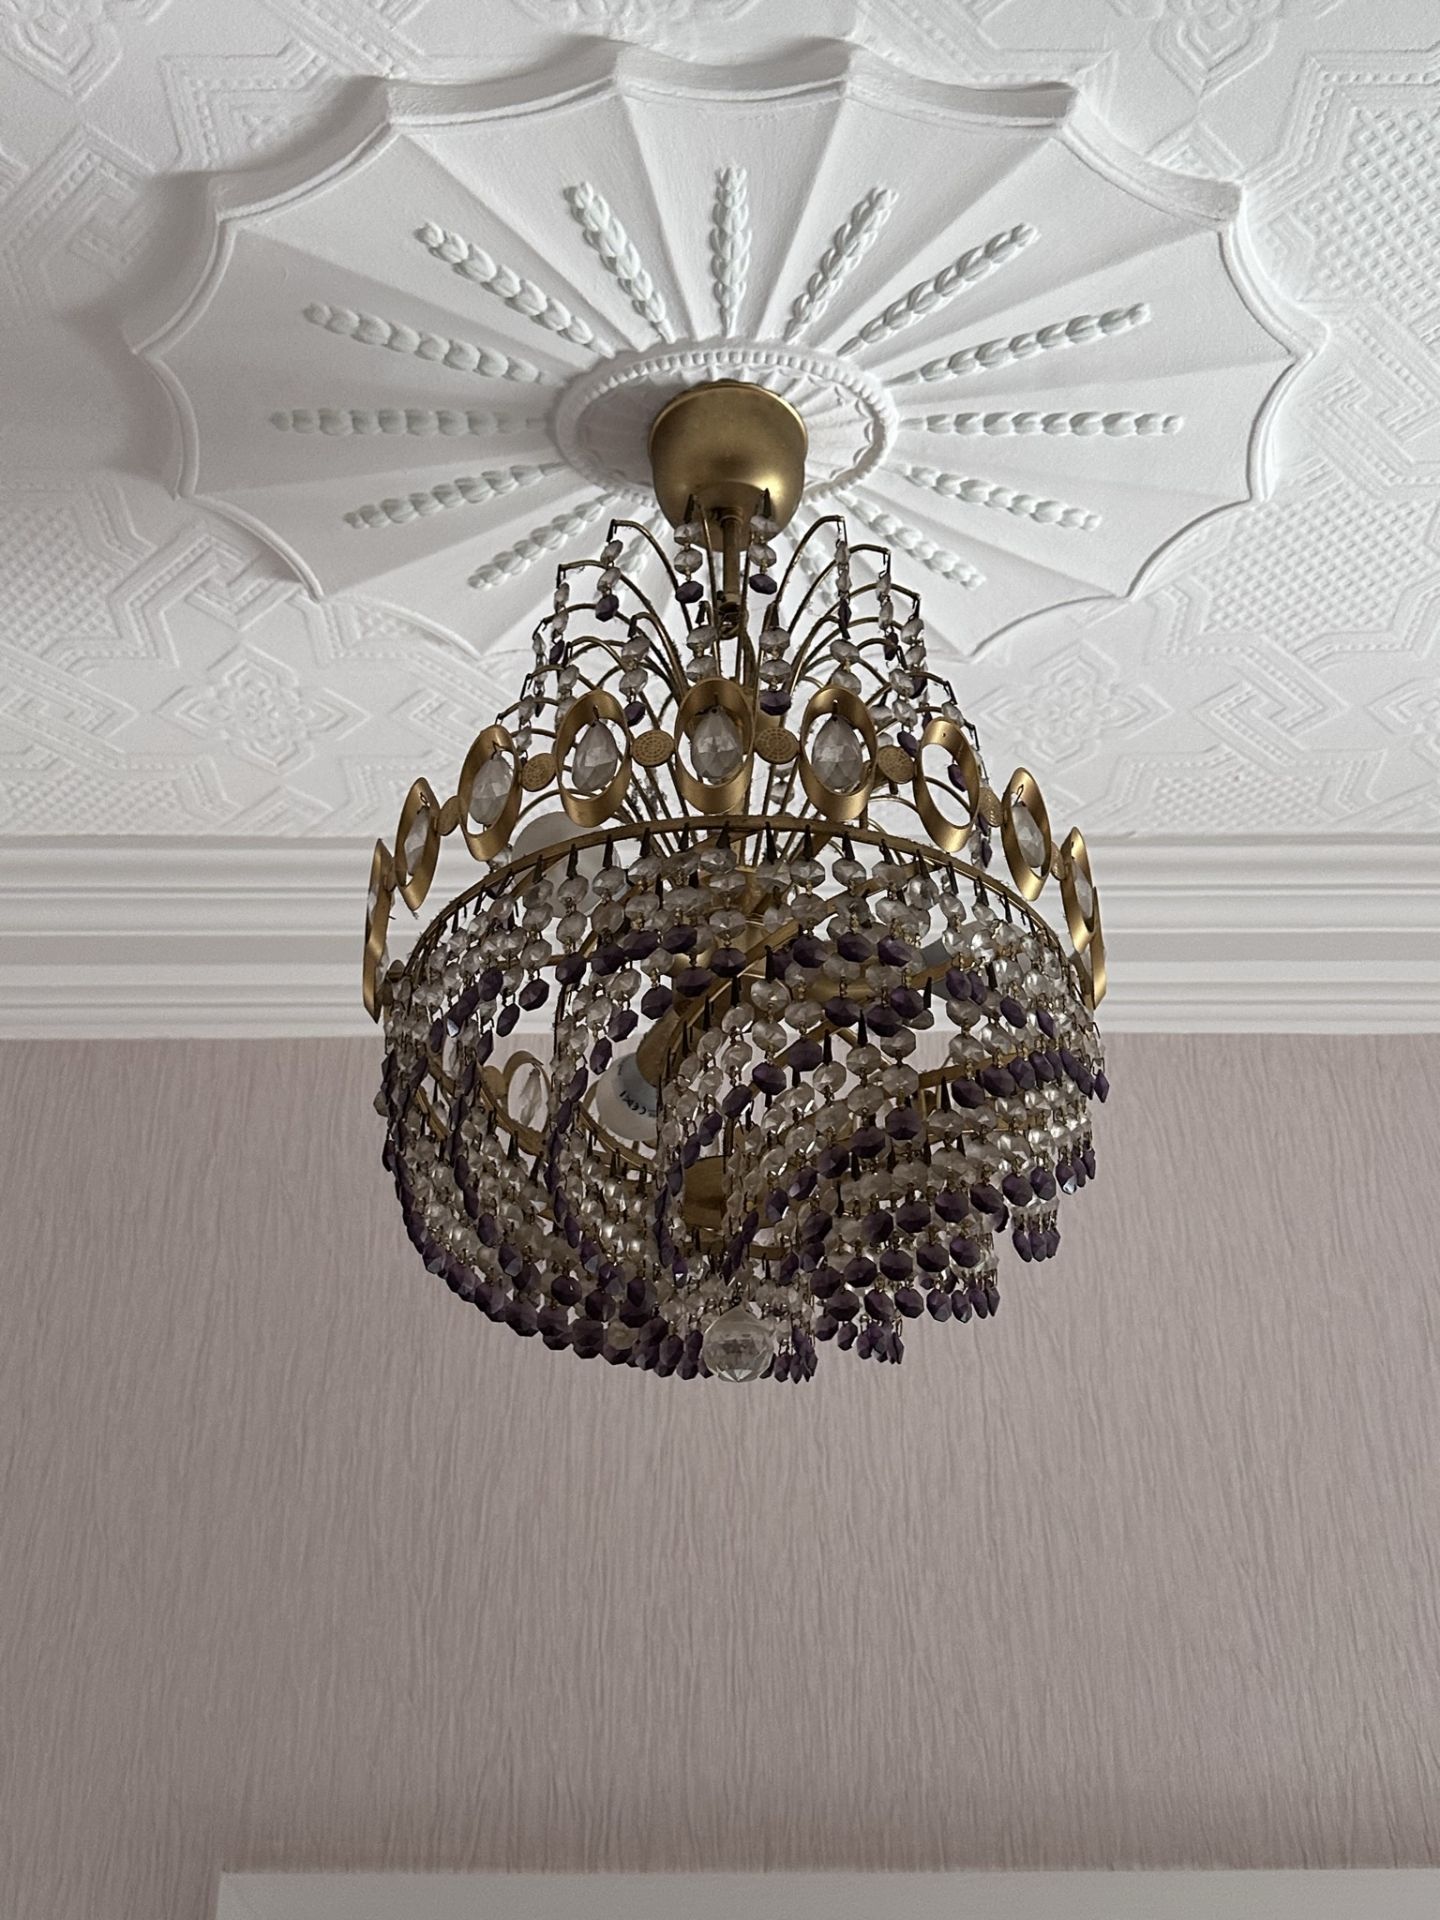 1 x Stunning REAL CRYSTAL And Gemstone Gold Plated Pendant Ceiling Light - Image 2 of 7